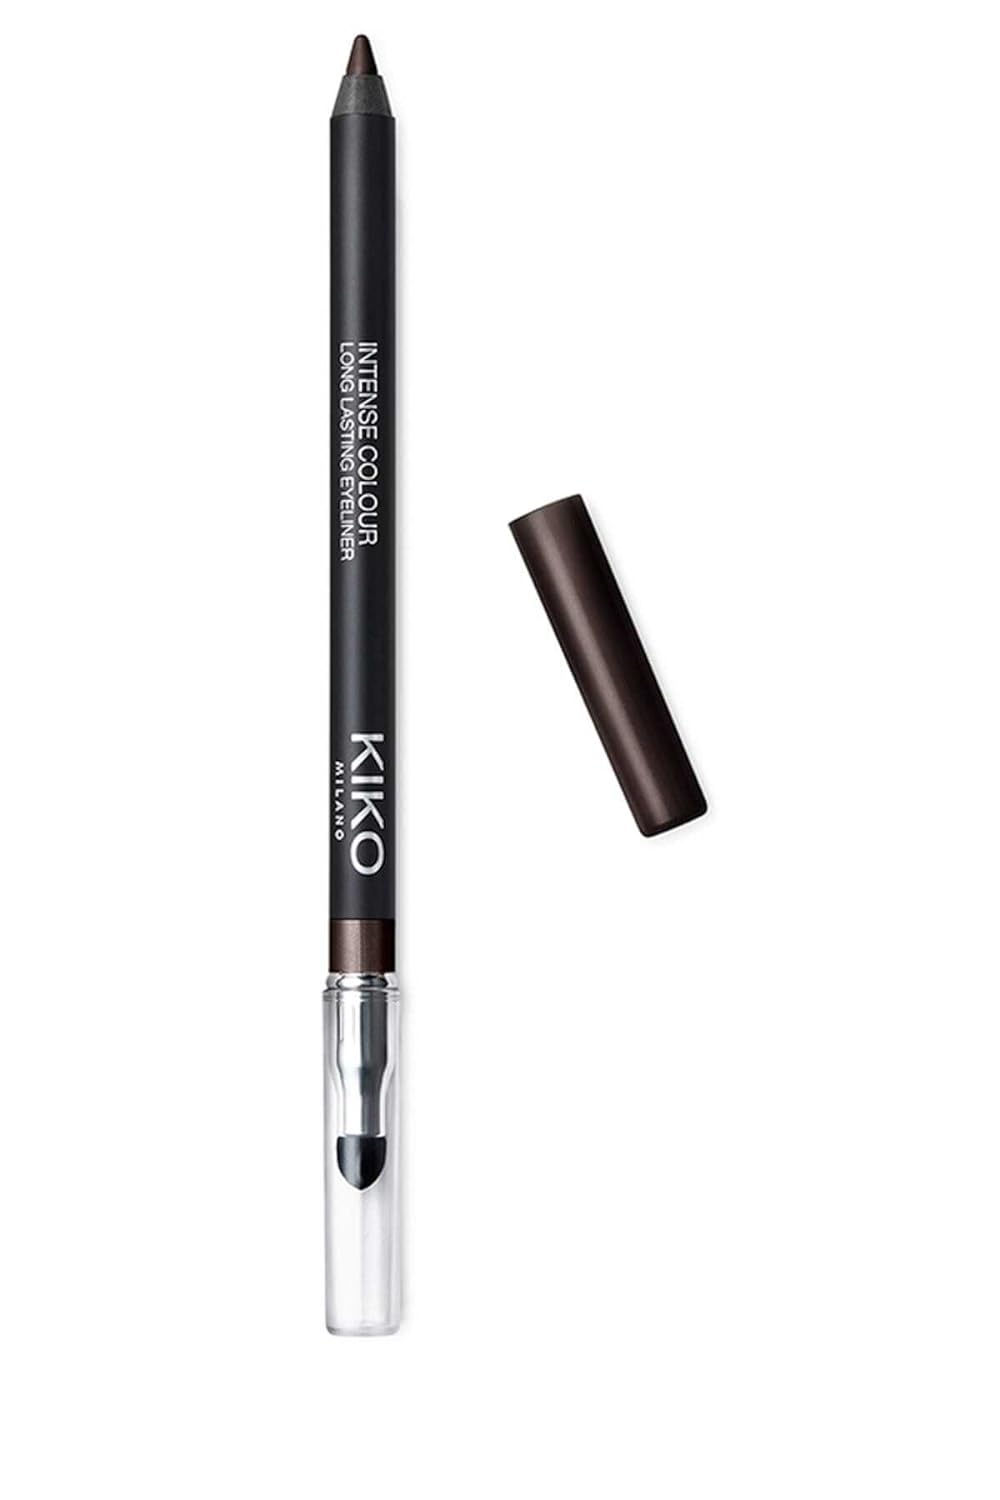 Kiko MILANO - Intense Colour Long Lasting Eyeliner 06 Intense and smooth-gliding outer eye pencil with long wear